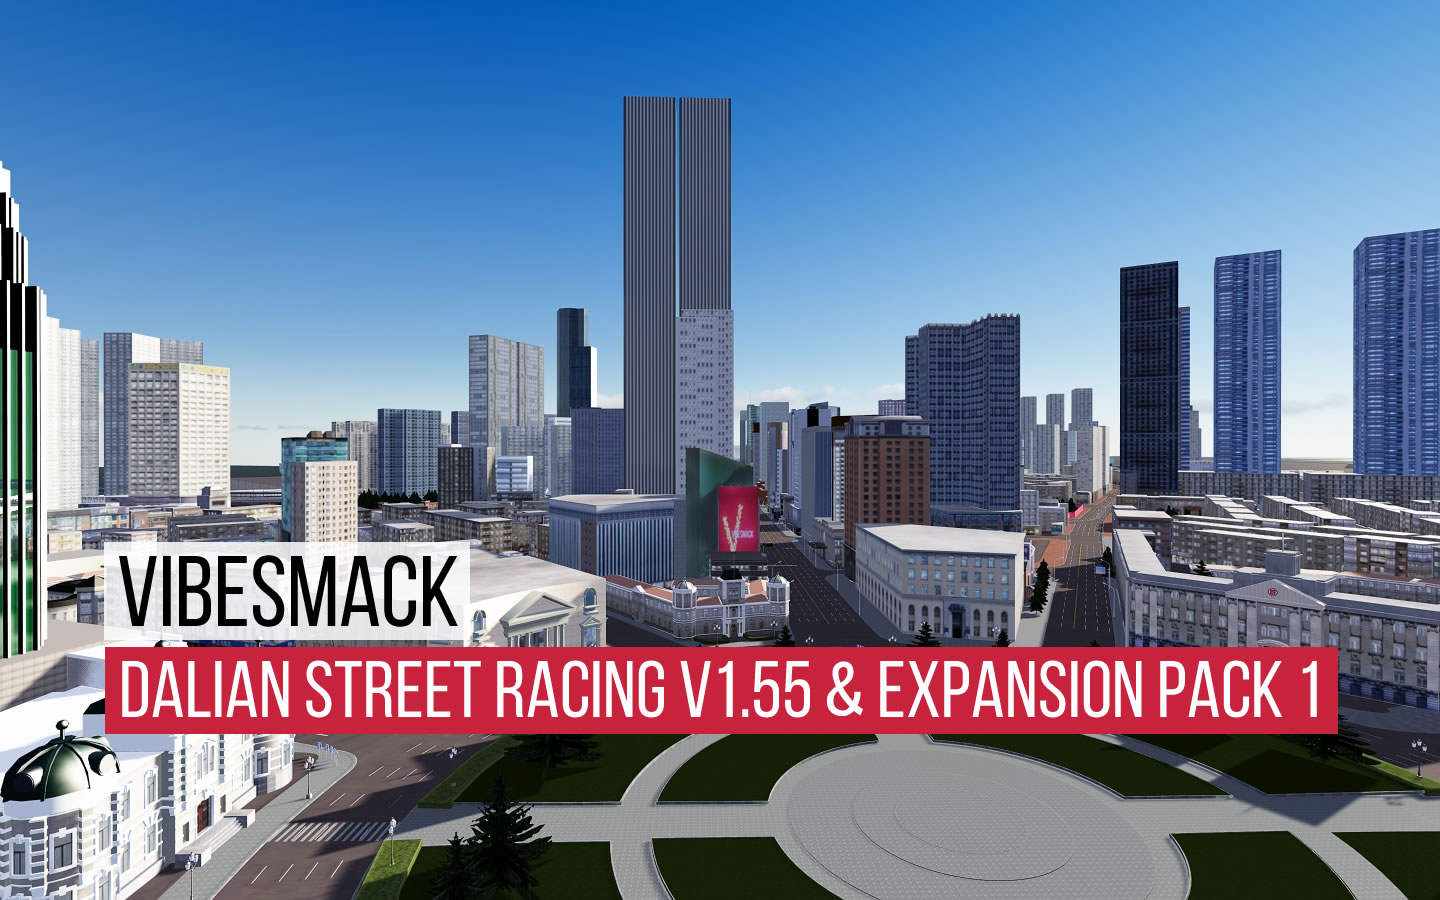 VibeSmack SStreet Racing Dalian Expansion Pack1 - Digital Race Track for Assetto Corsa